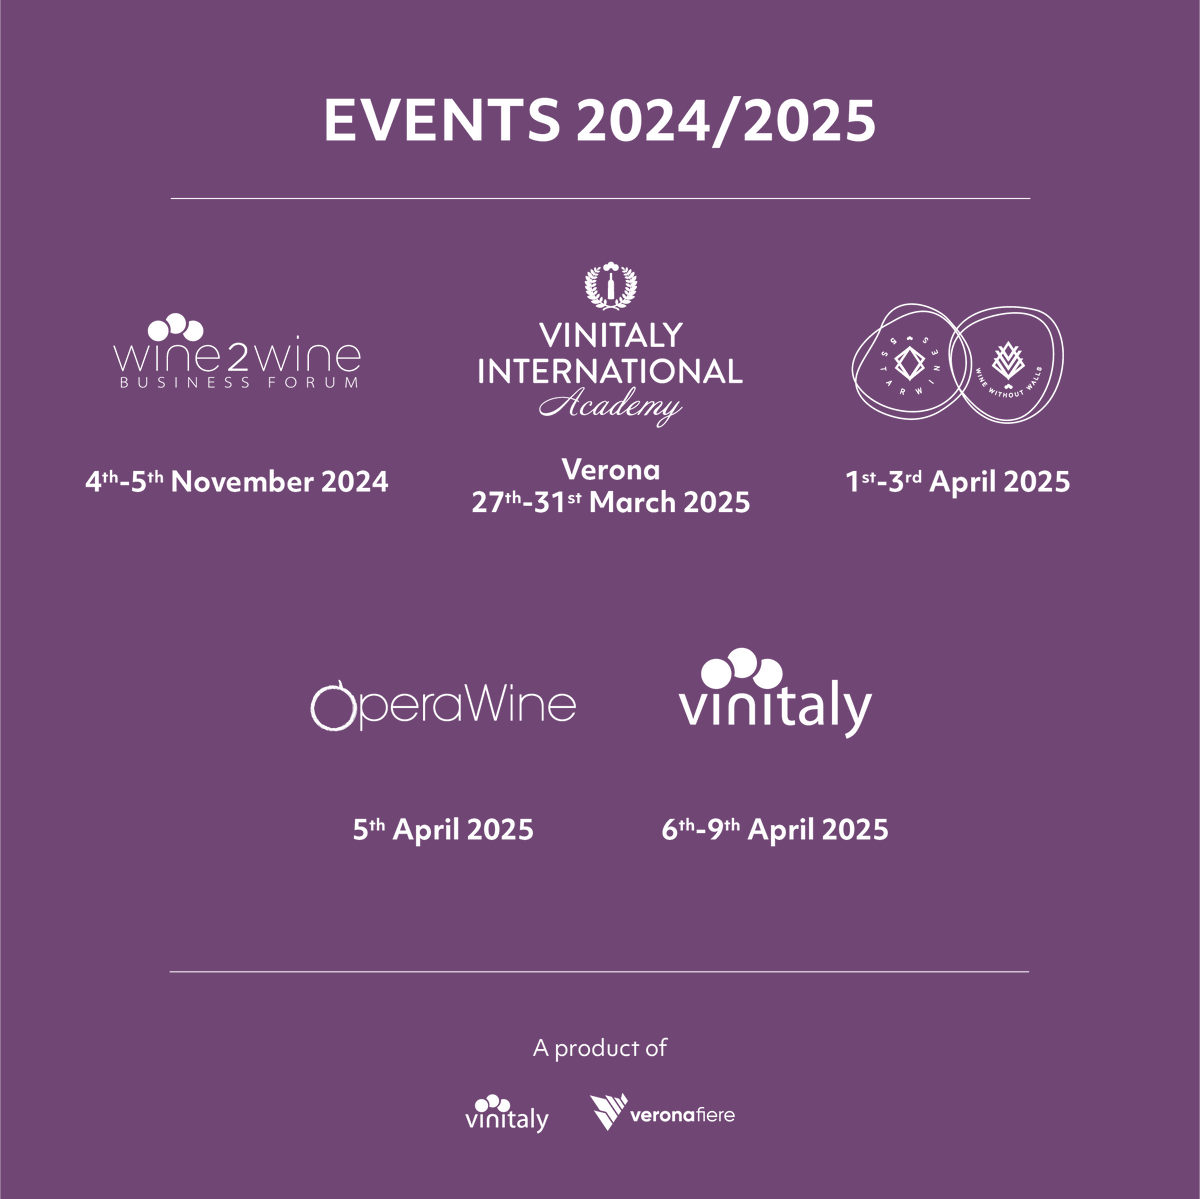 Save the dates! 🍷 Experience the pinnacle of wine gatherings in 2024/2025 - discover more on our website ➡️ loom.ly/8I3xqNg